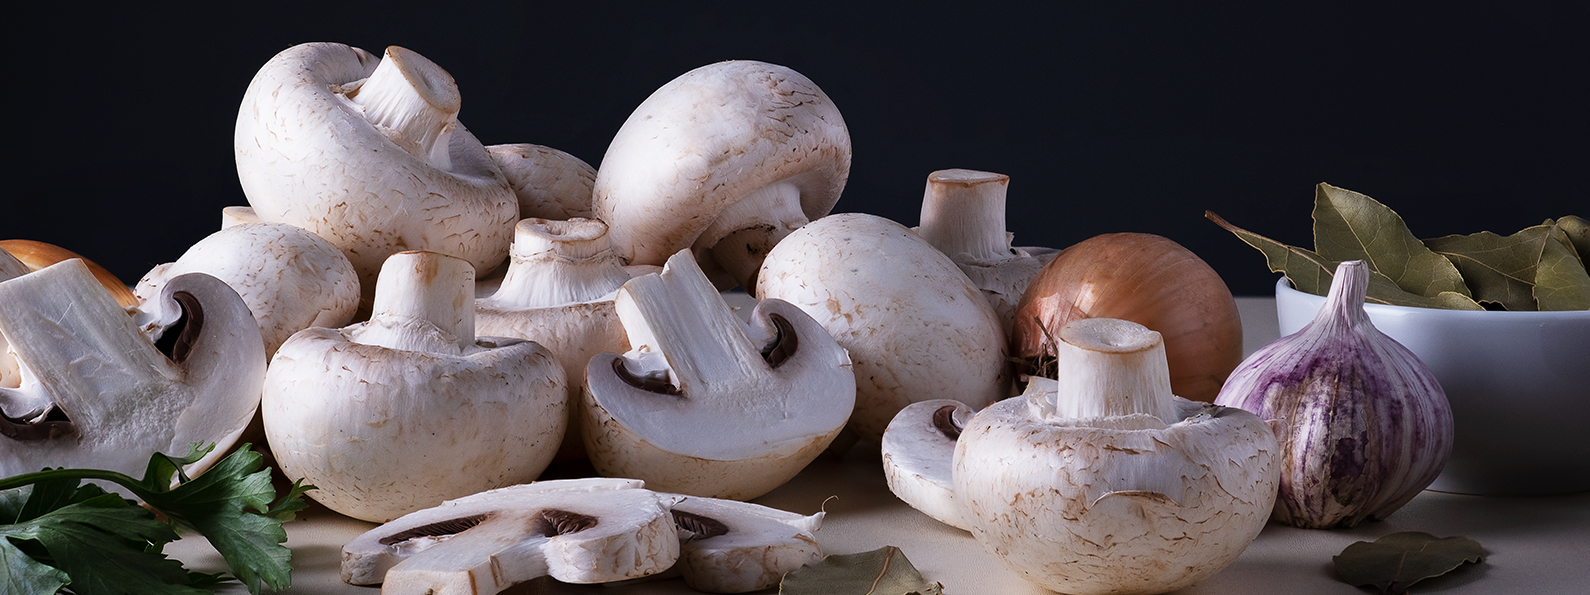 a group of mushrooms and onions 